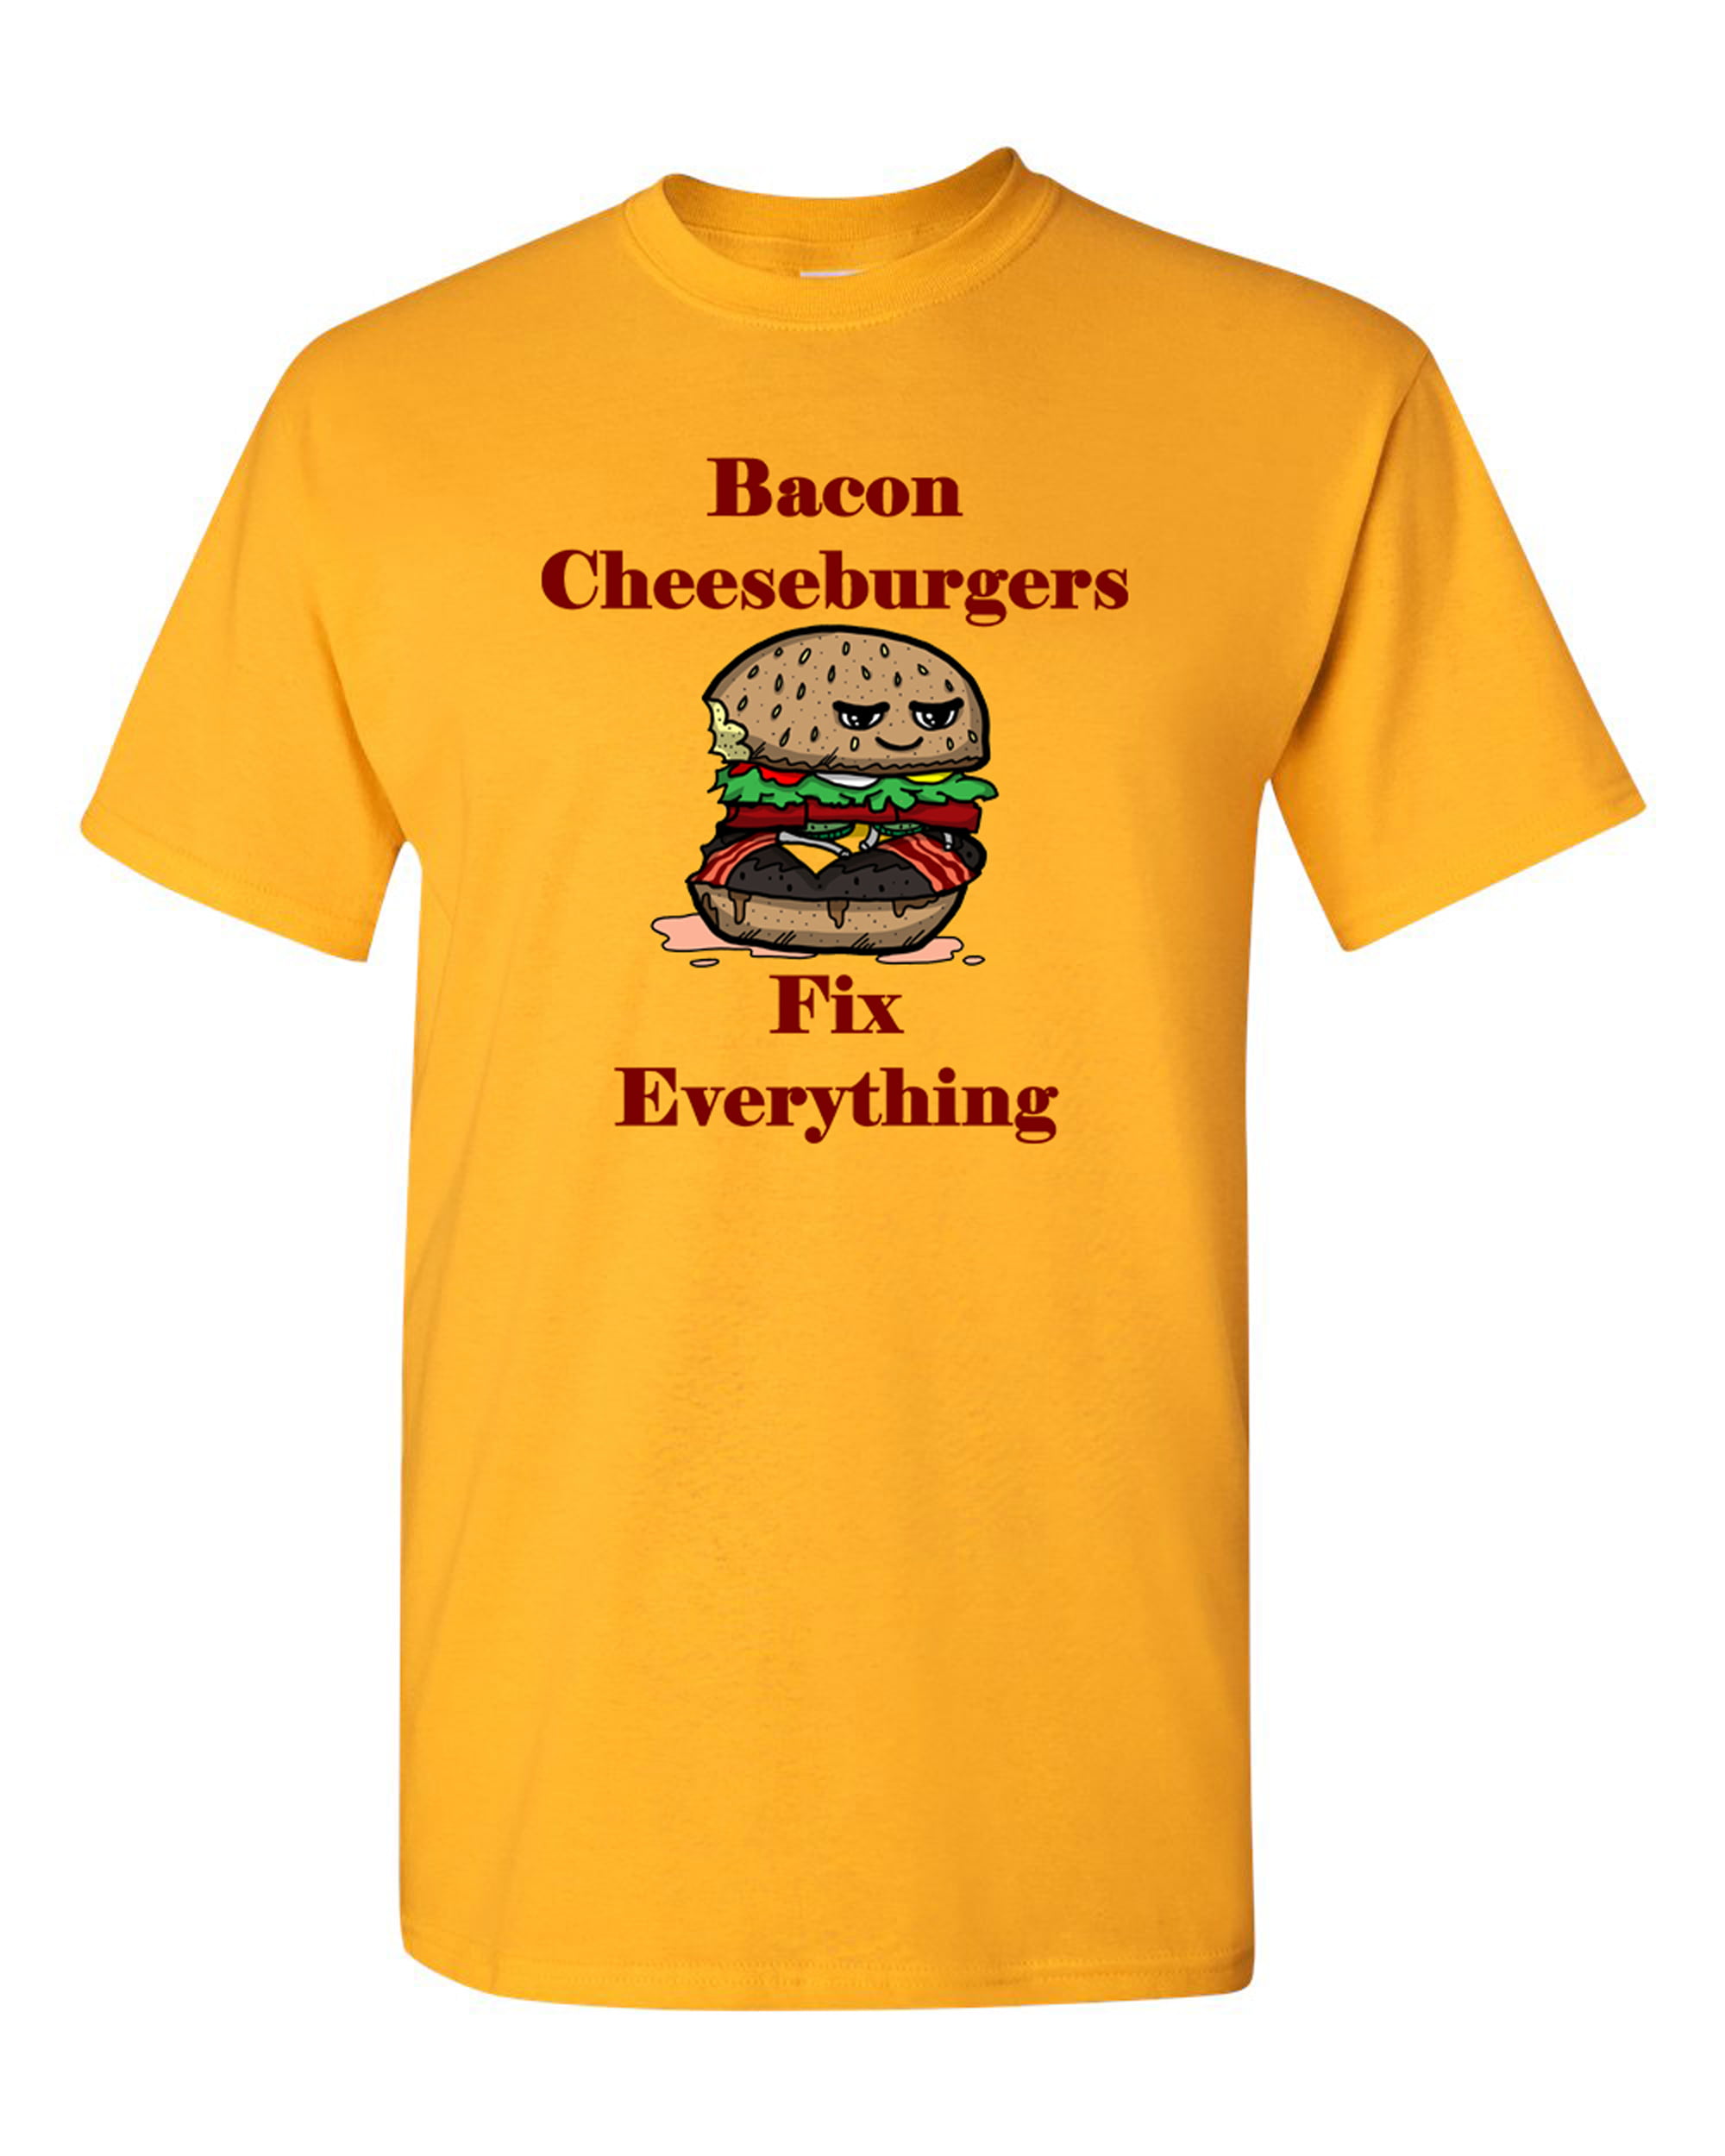 City Shirts Bacon Cheeseburgers Fix Everything Adult Dt T Shirts